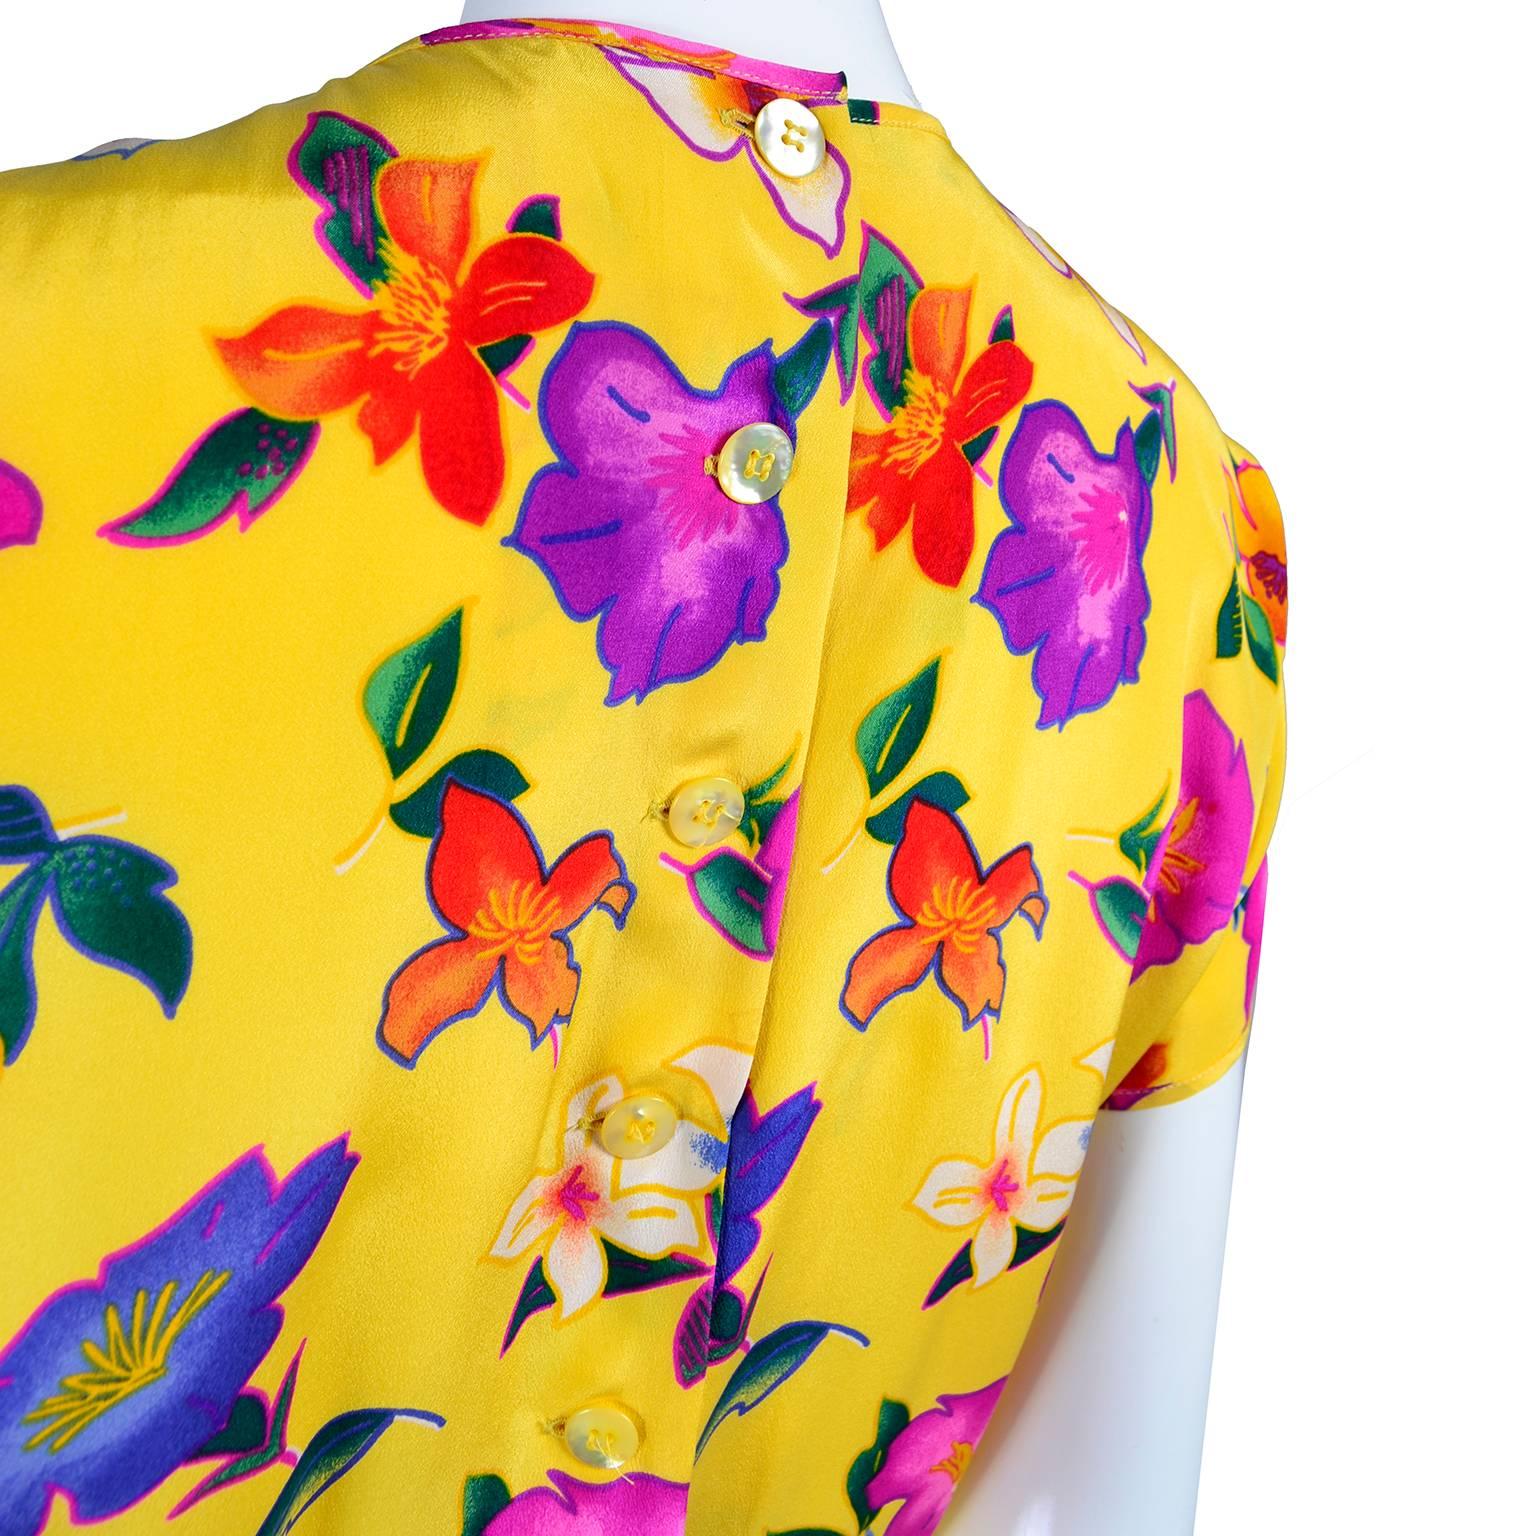 Vintage Escada Dress in a Yellow Floral Silk Print by Margaretha Ley Size 8/10 For Sale 2